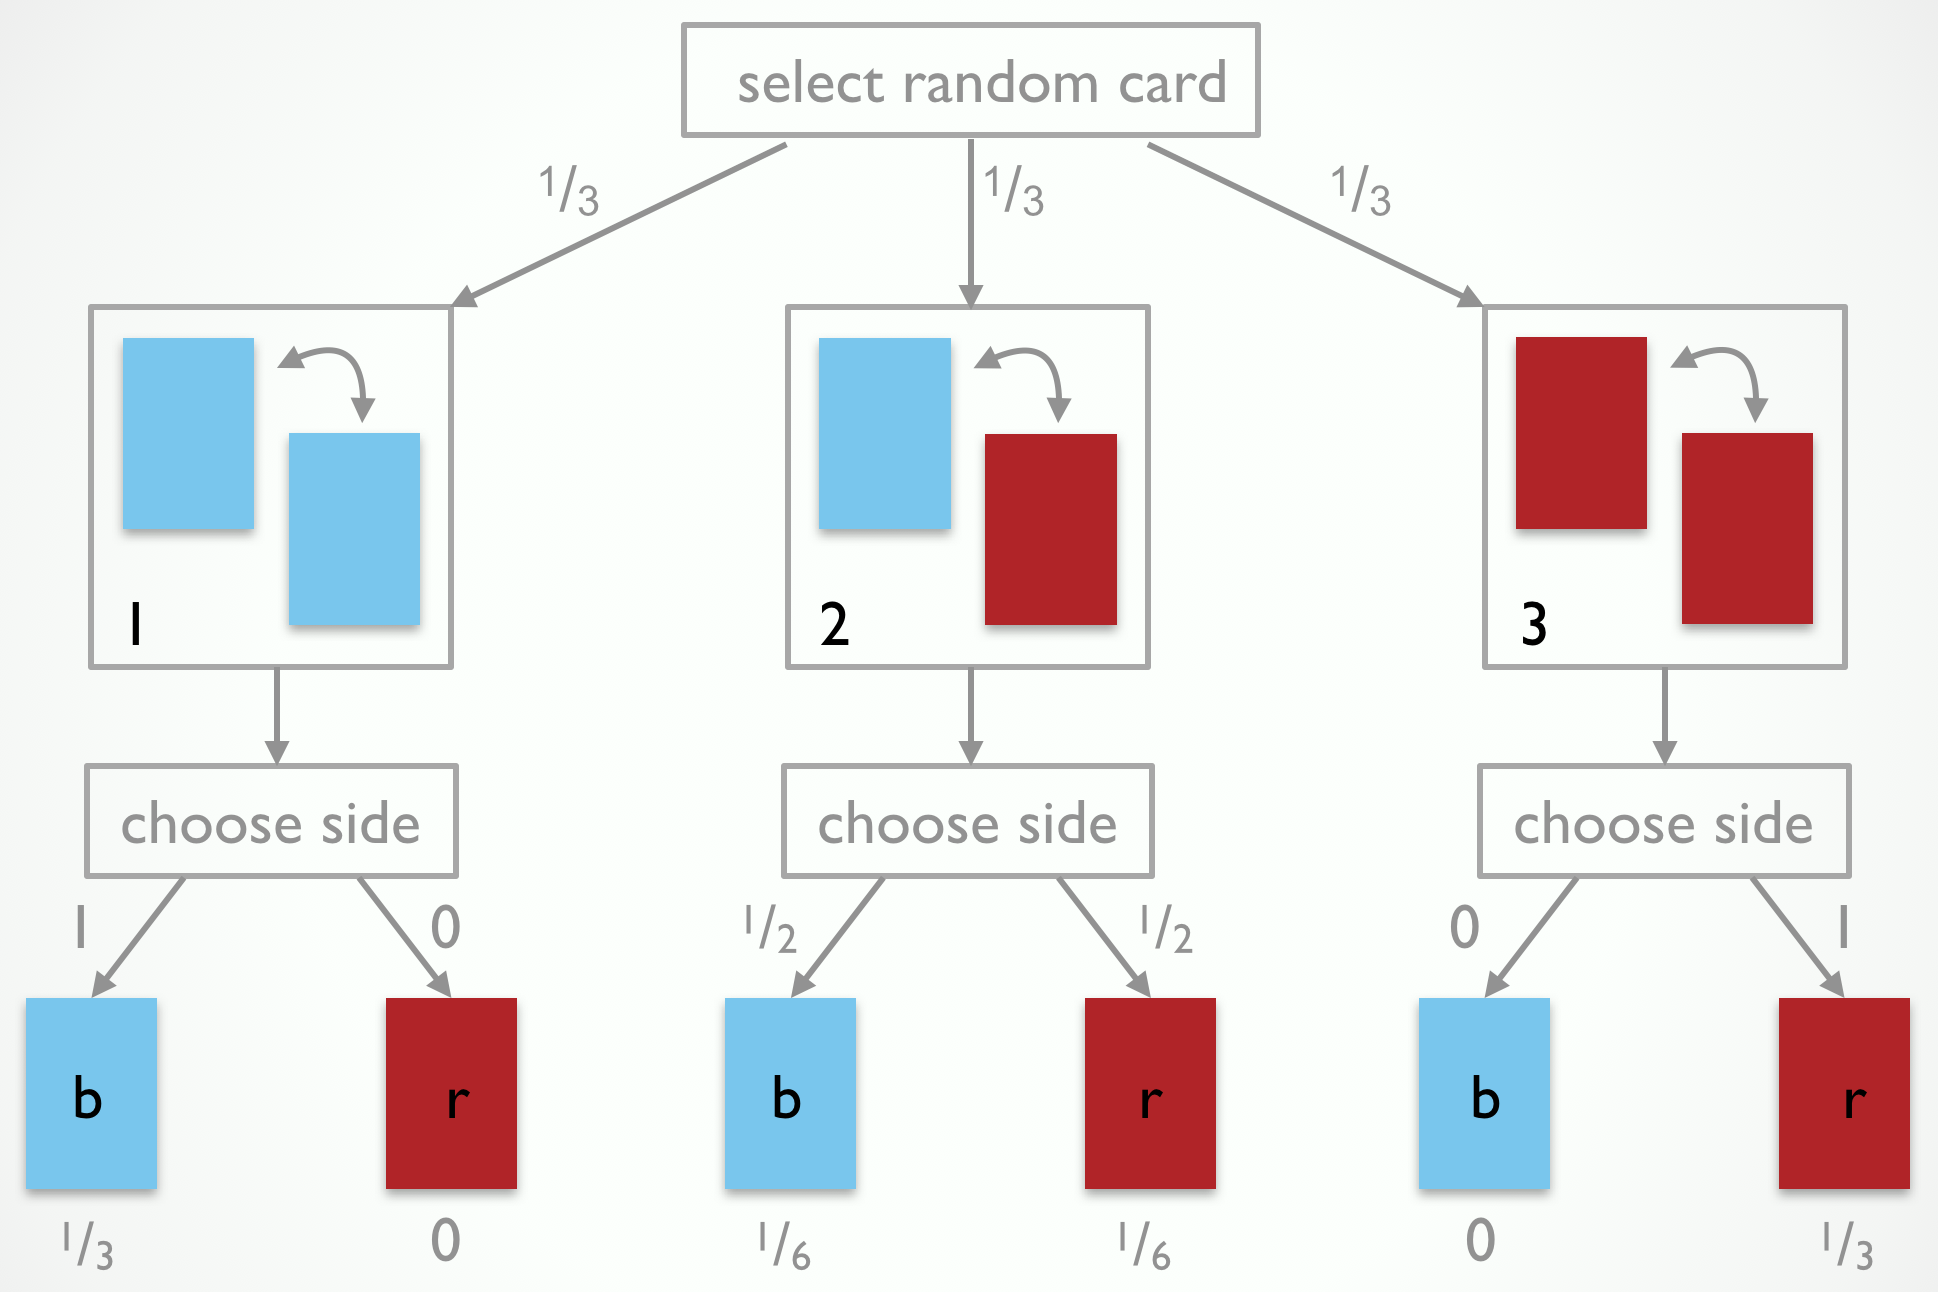 The observation-generating process for the 3-card problem. Jones selects a random card, then chooses a random side of it.